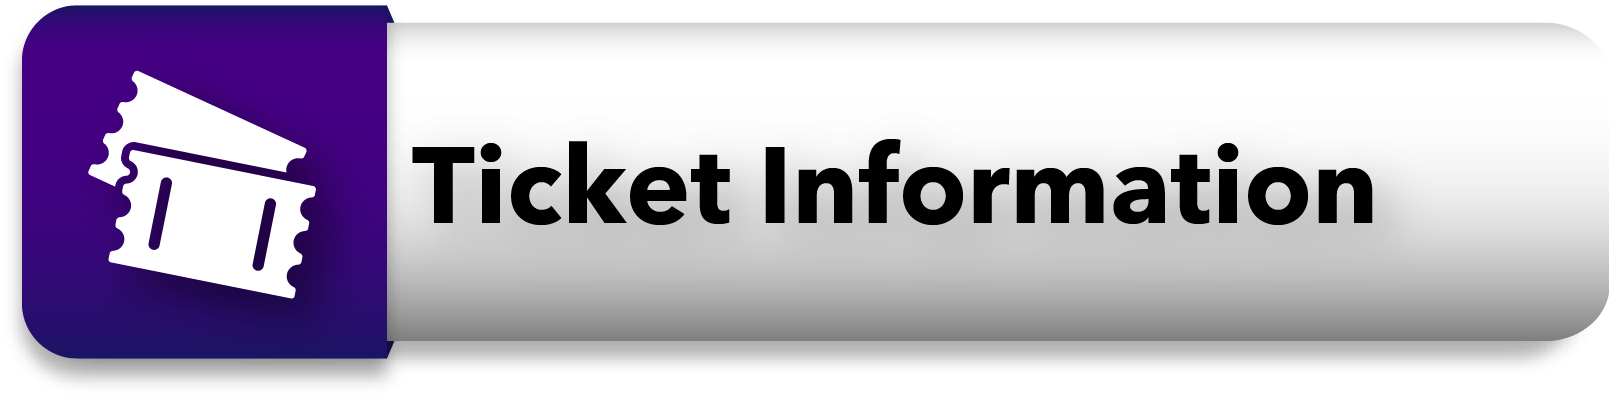 Ticket Information Button PNG image